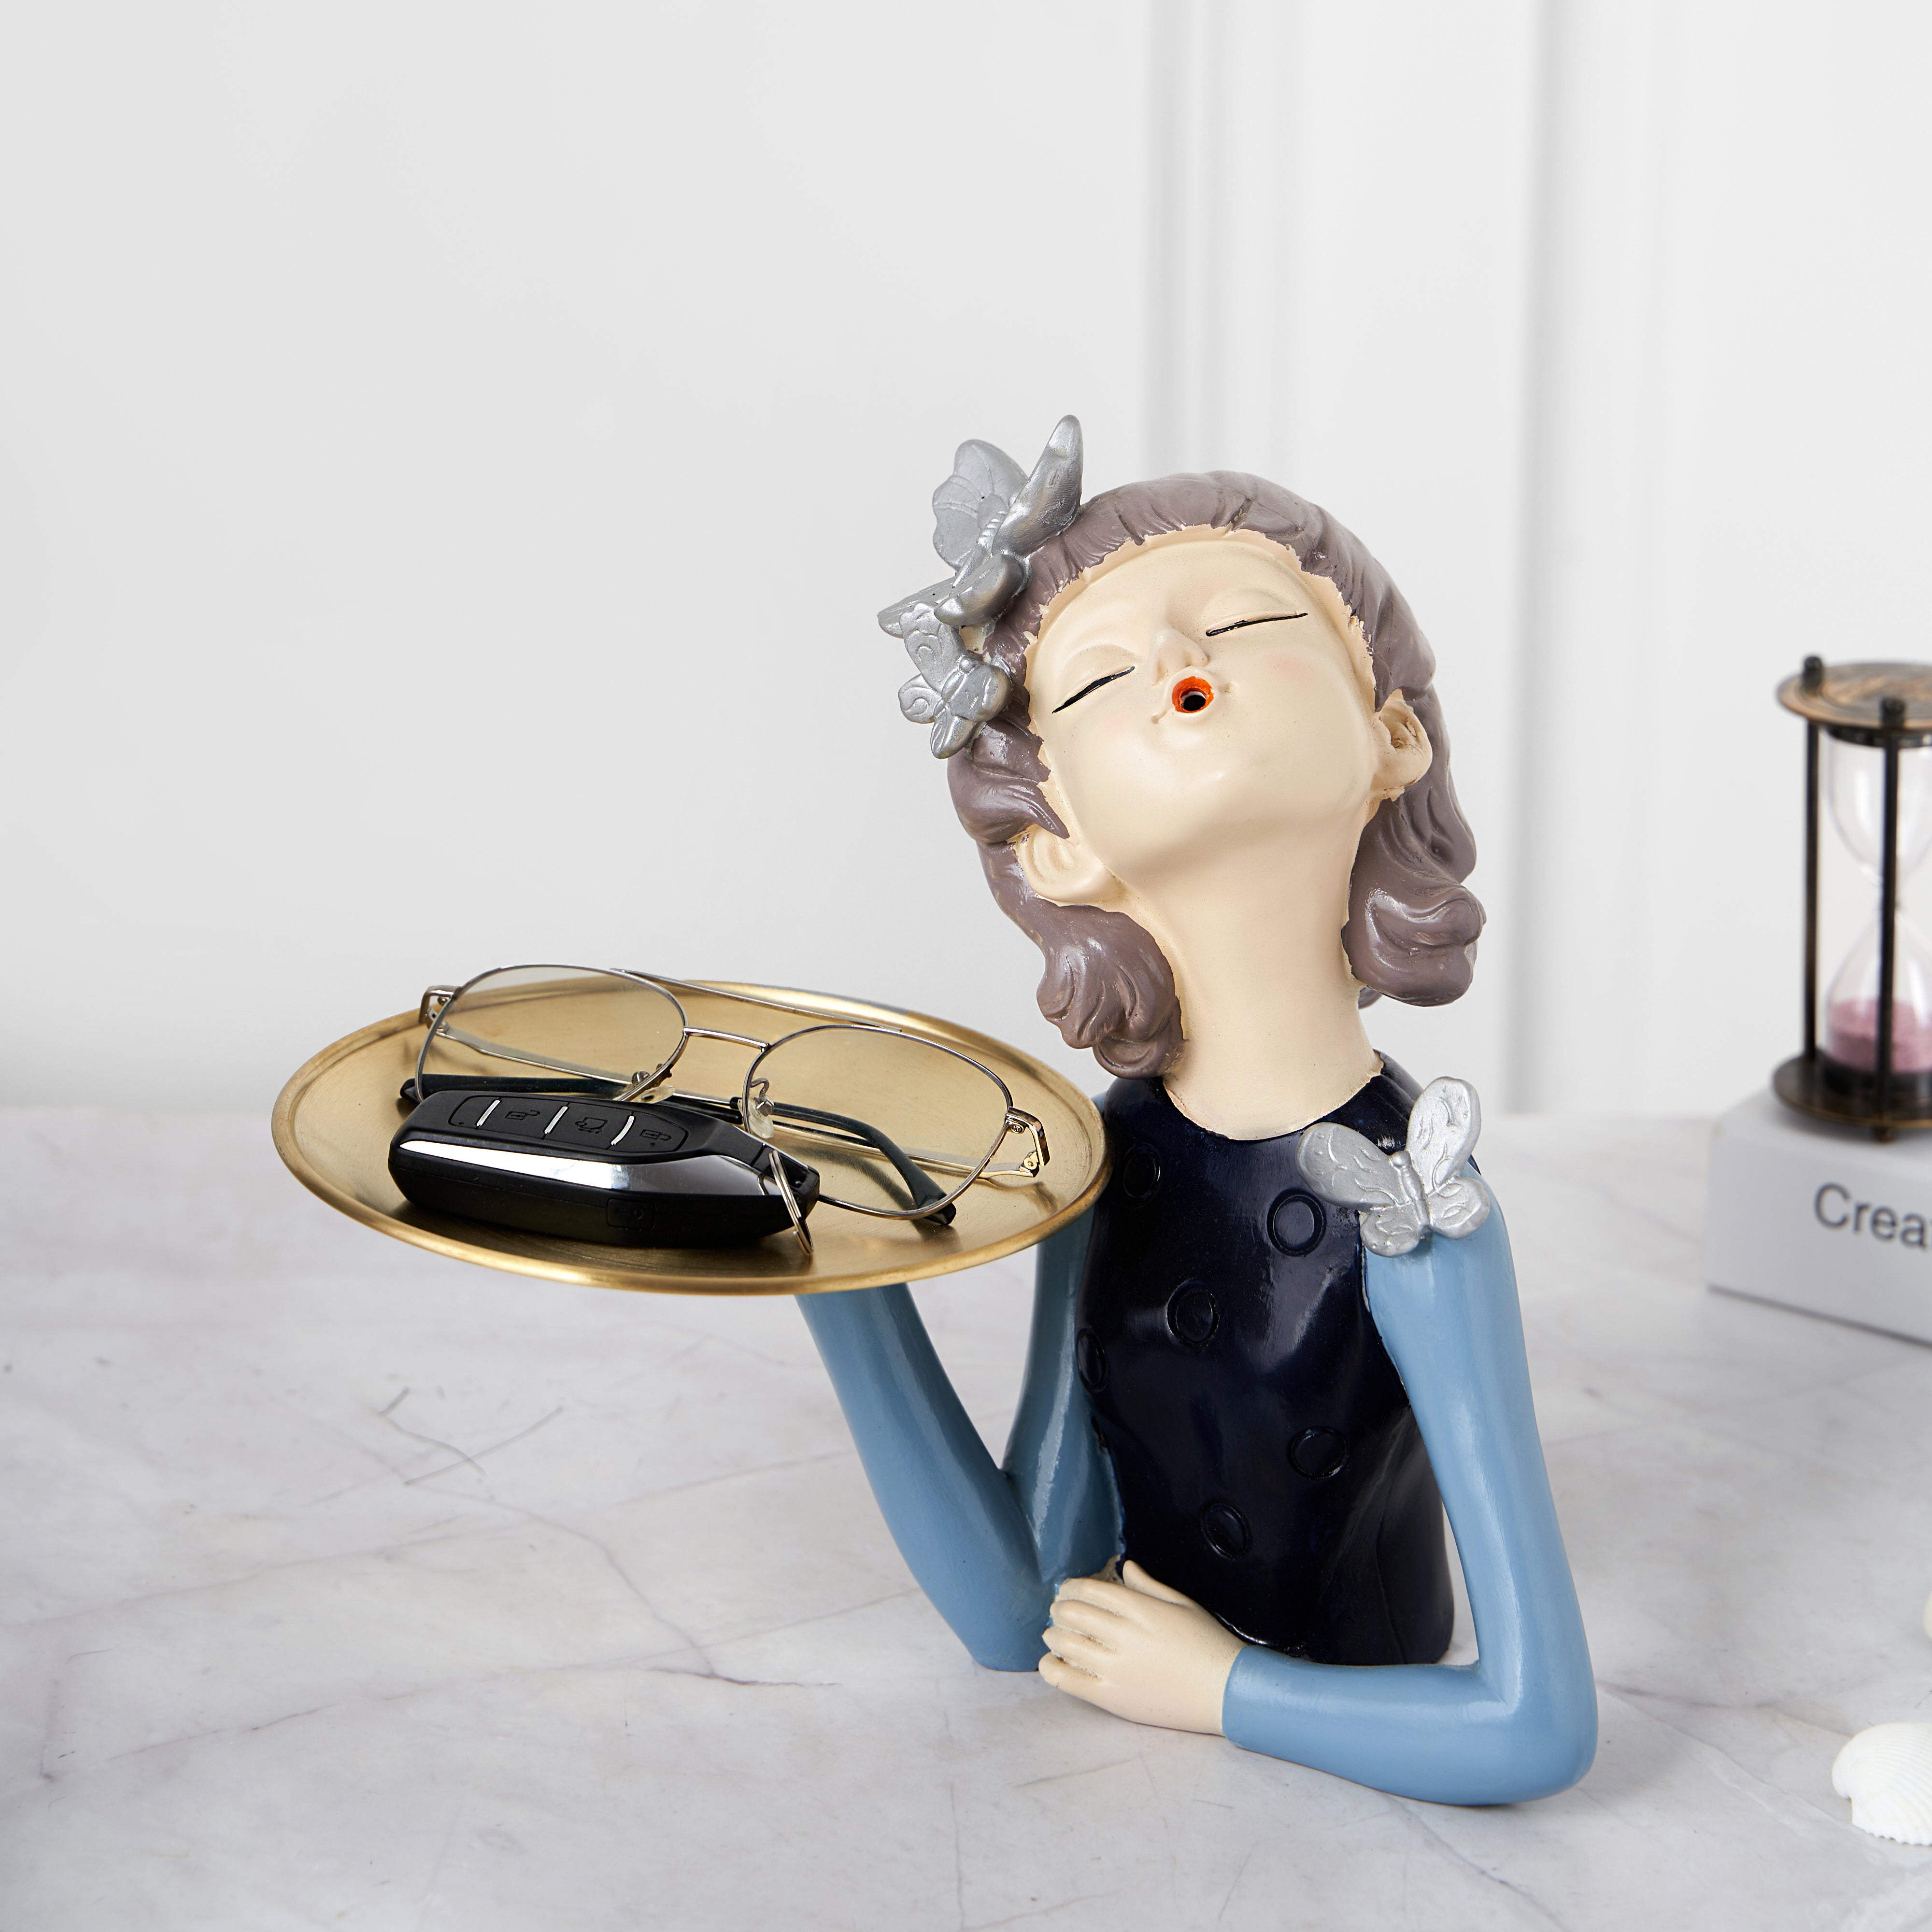 Nordic Lady Figurine With Plate Sculpture Figurines for Home Decor